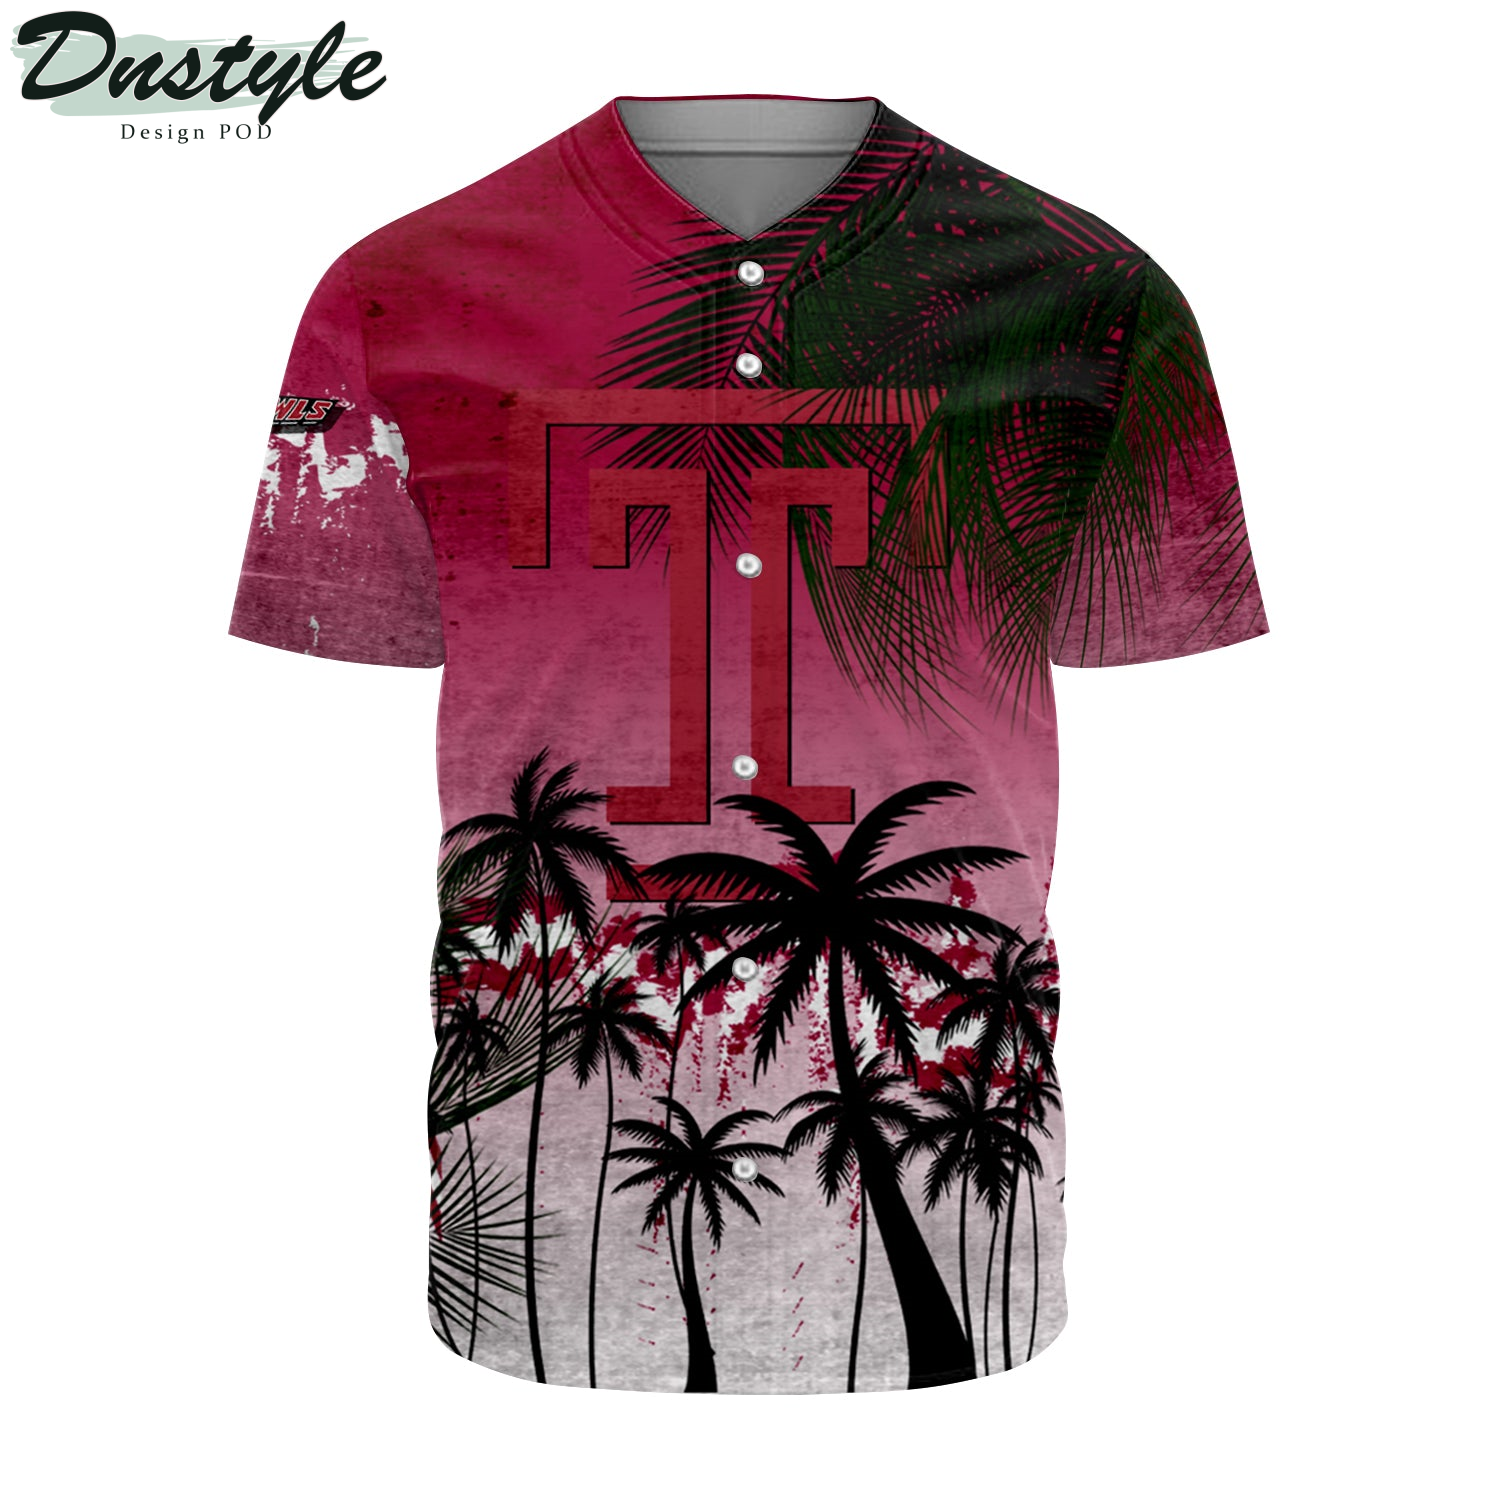 Temple Owls Baseball Jersey Coconut Tree Tropical Grunge